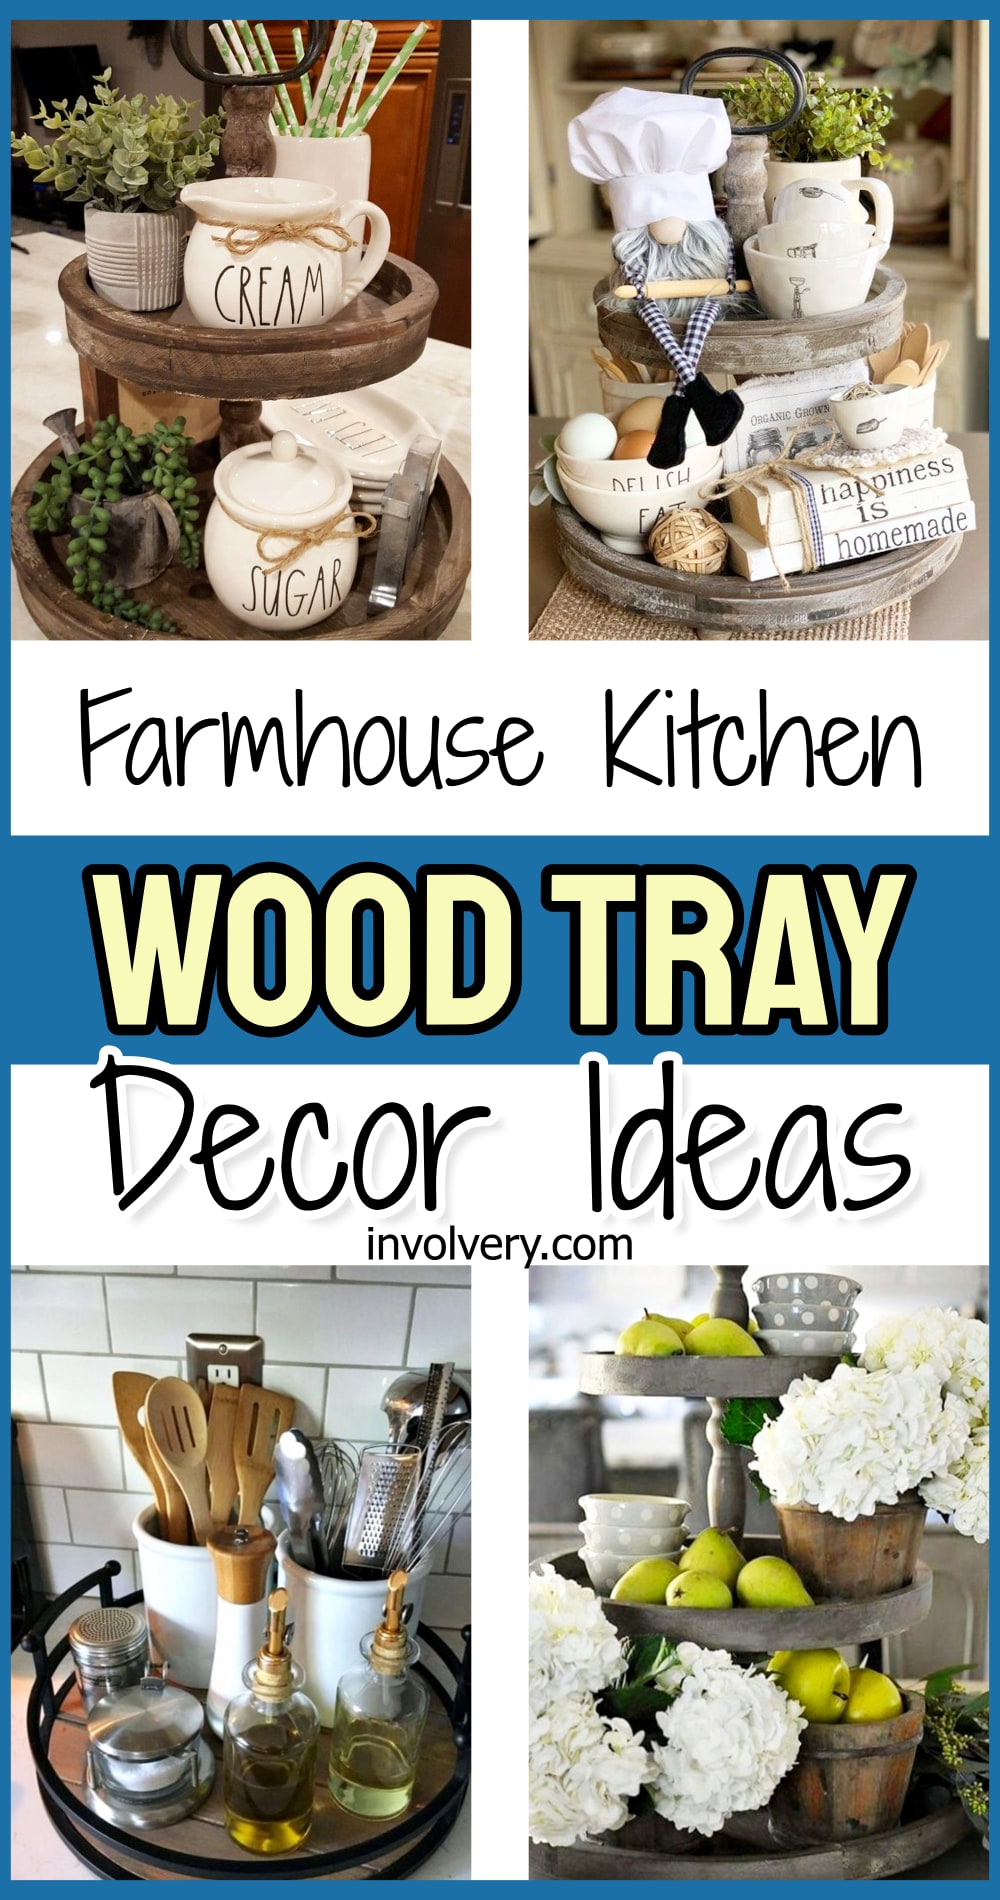 farmhouse kitchen wood tray decor ideas for wooden tiered trays